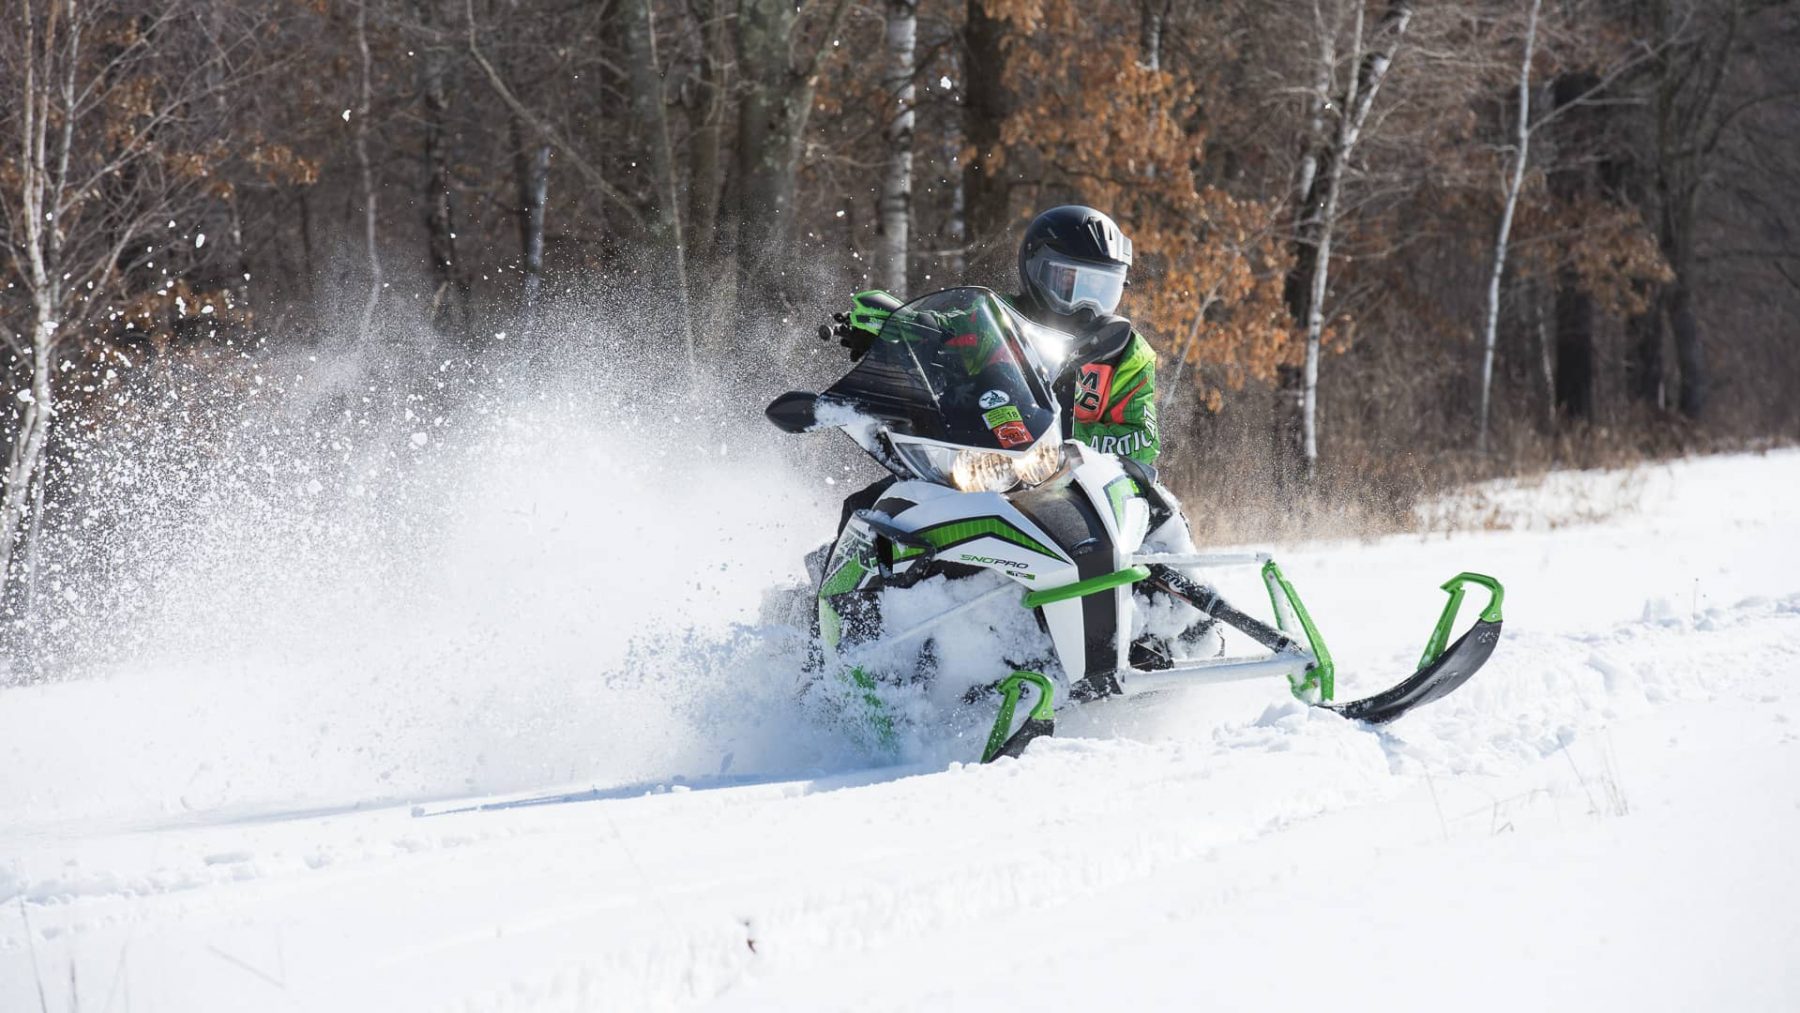 Article: Wisconsin snowmobile report: here’s where to find snow